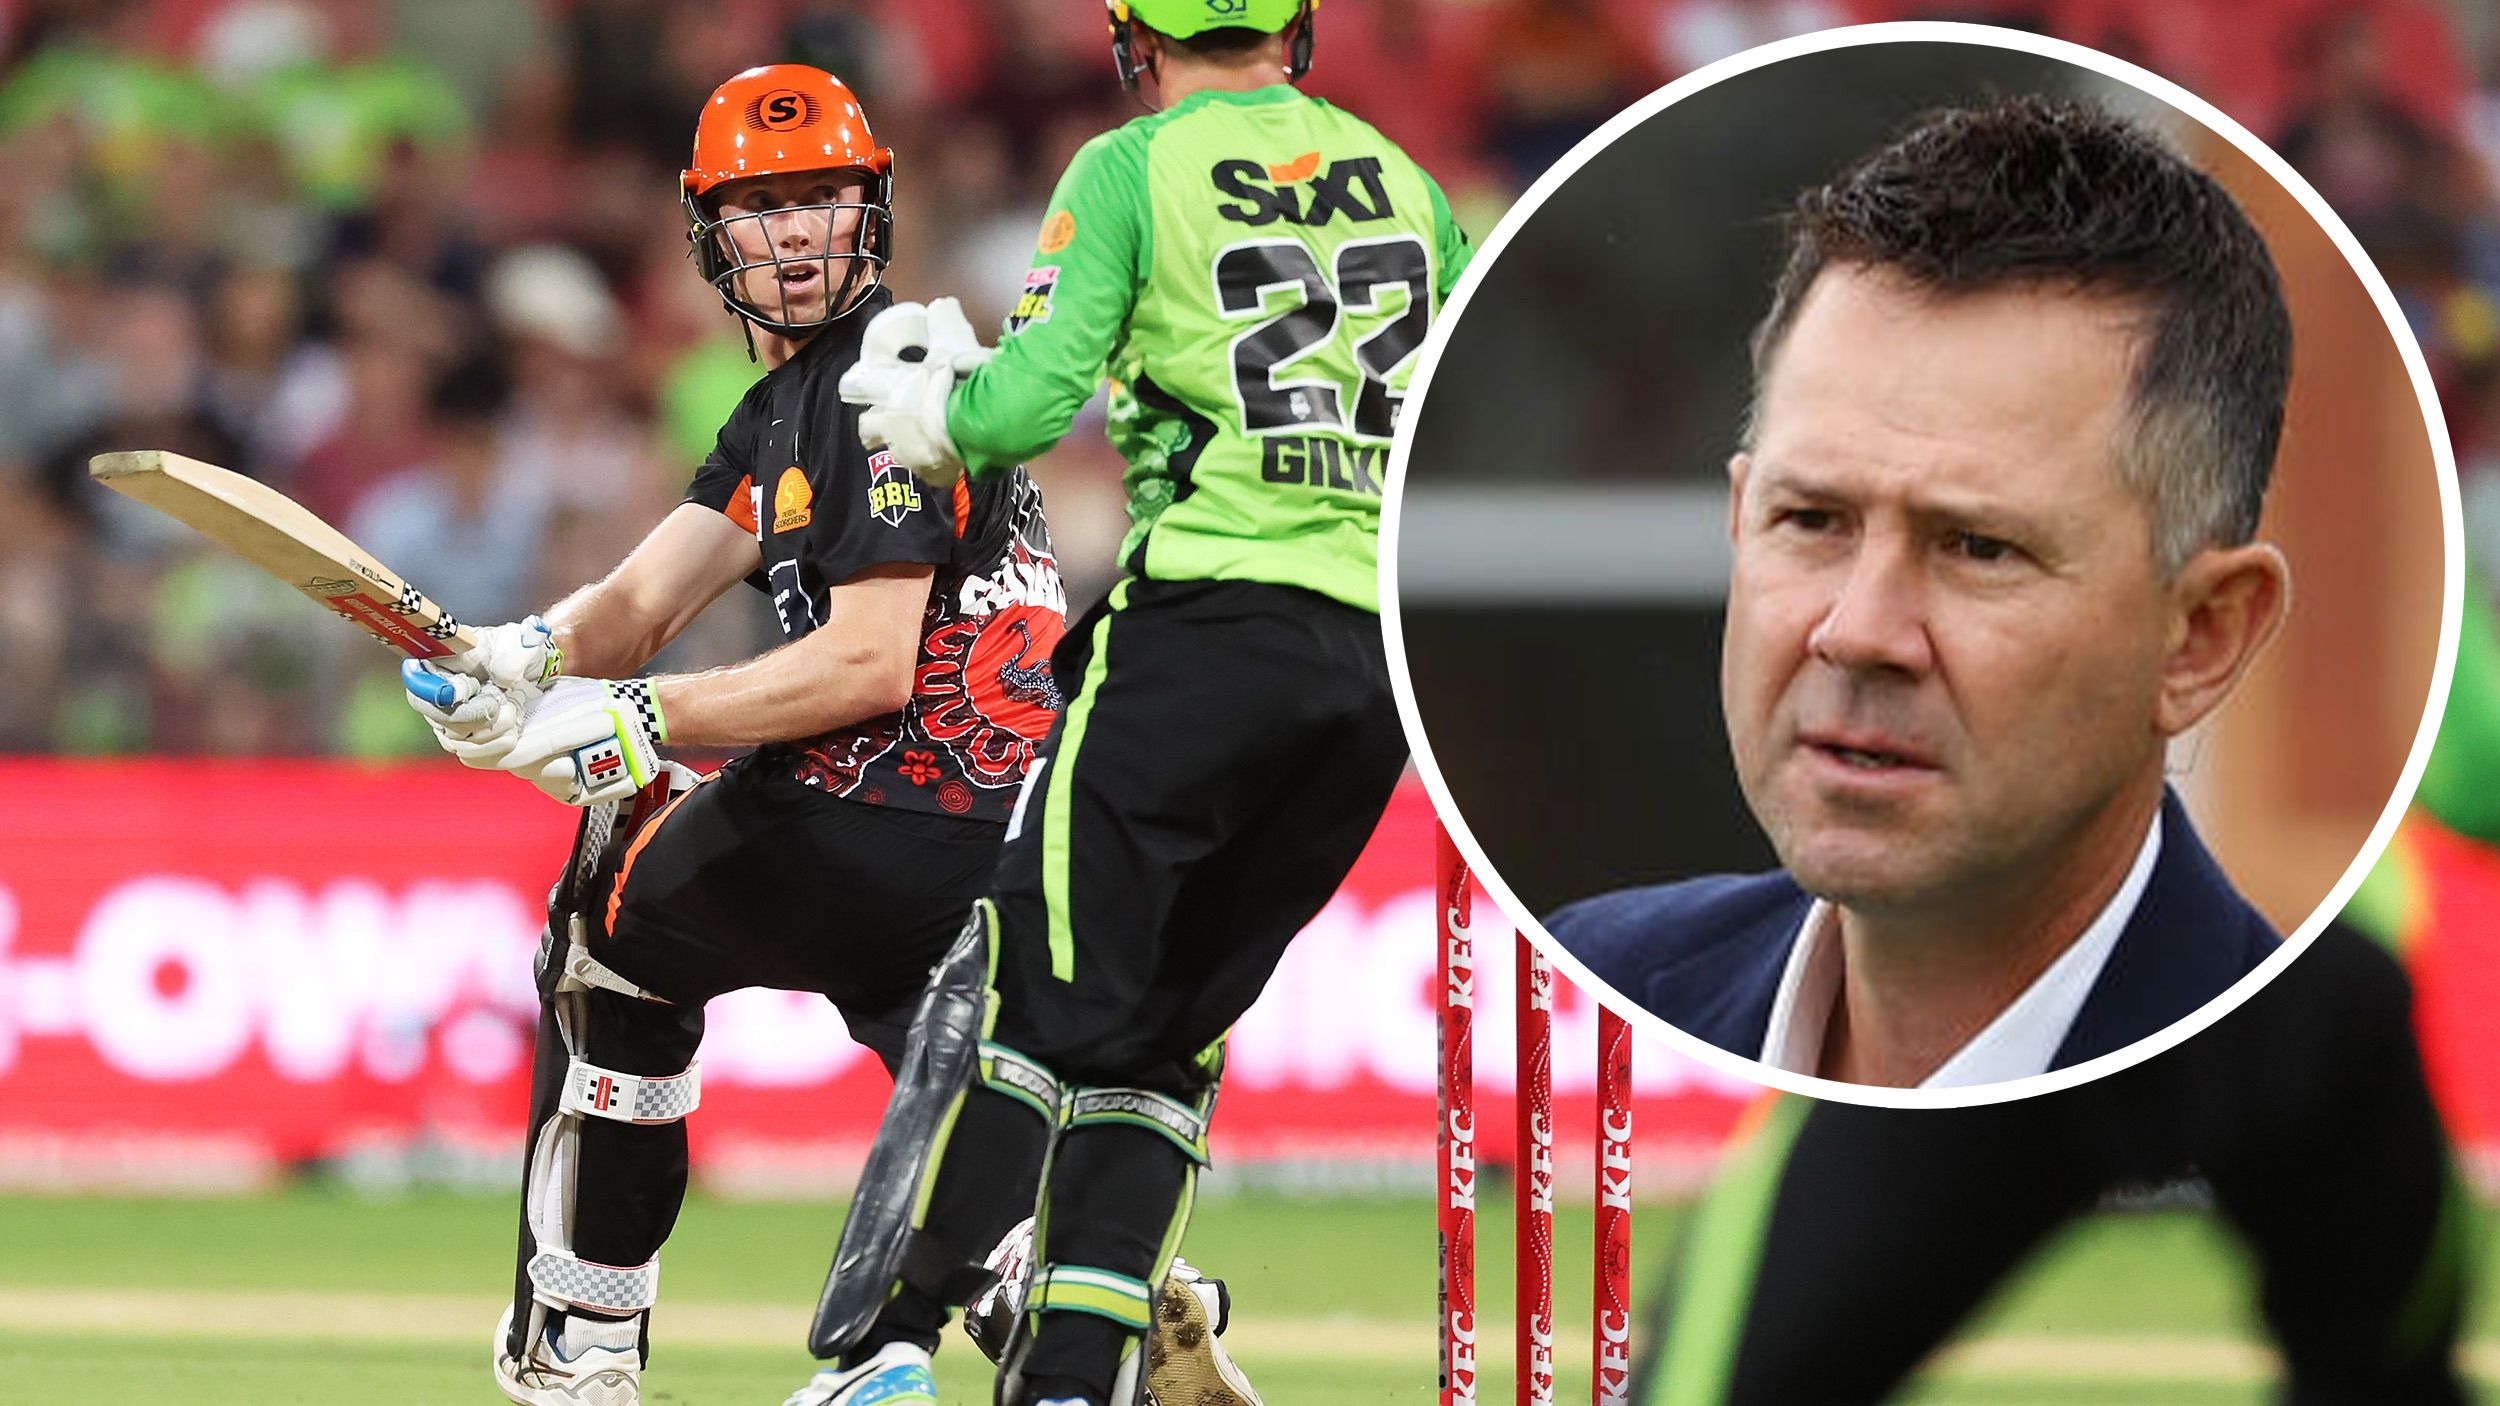 Aussie legend Ricky Ponting rips into 'substandard' wicket on offer at BBL ground